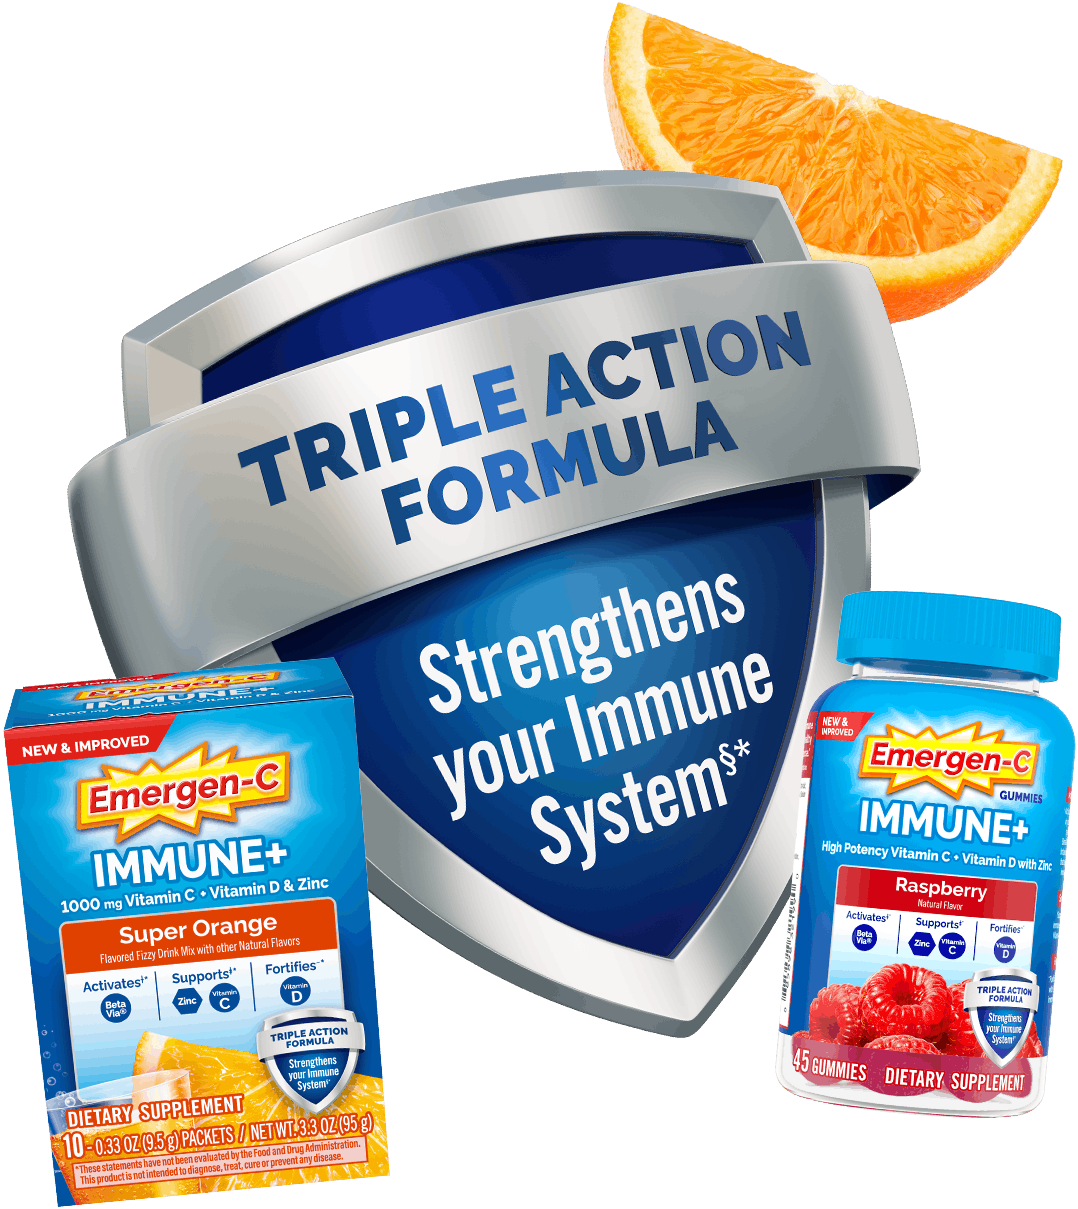 Triple Action shield with Emergen-C Immune+ products